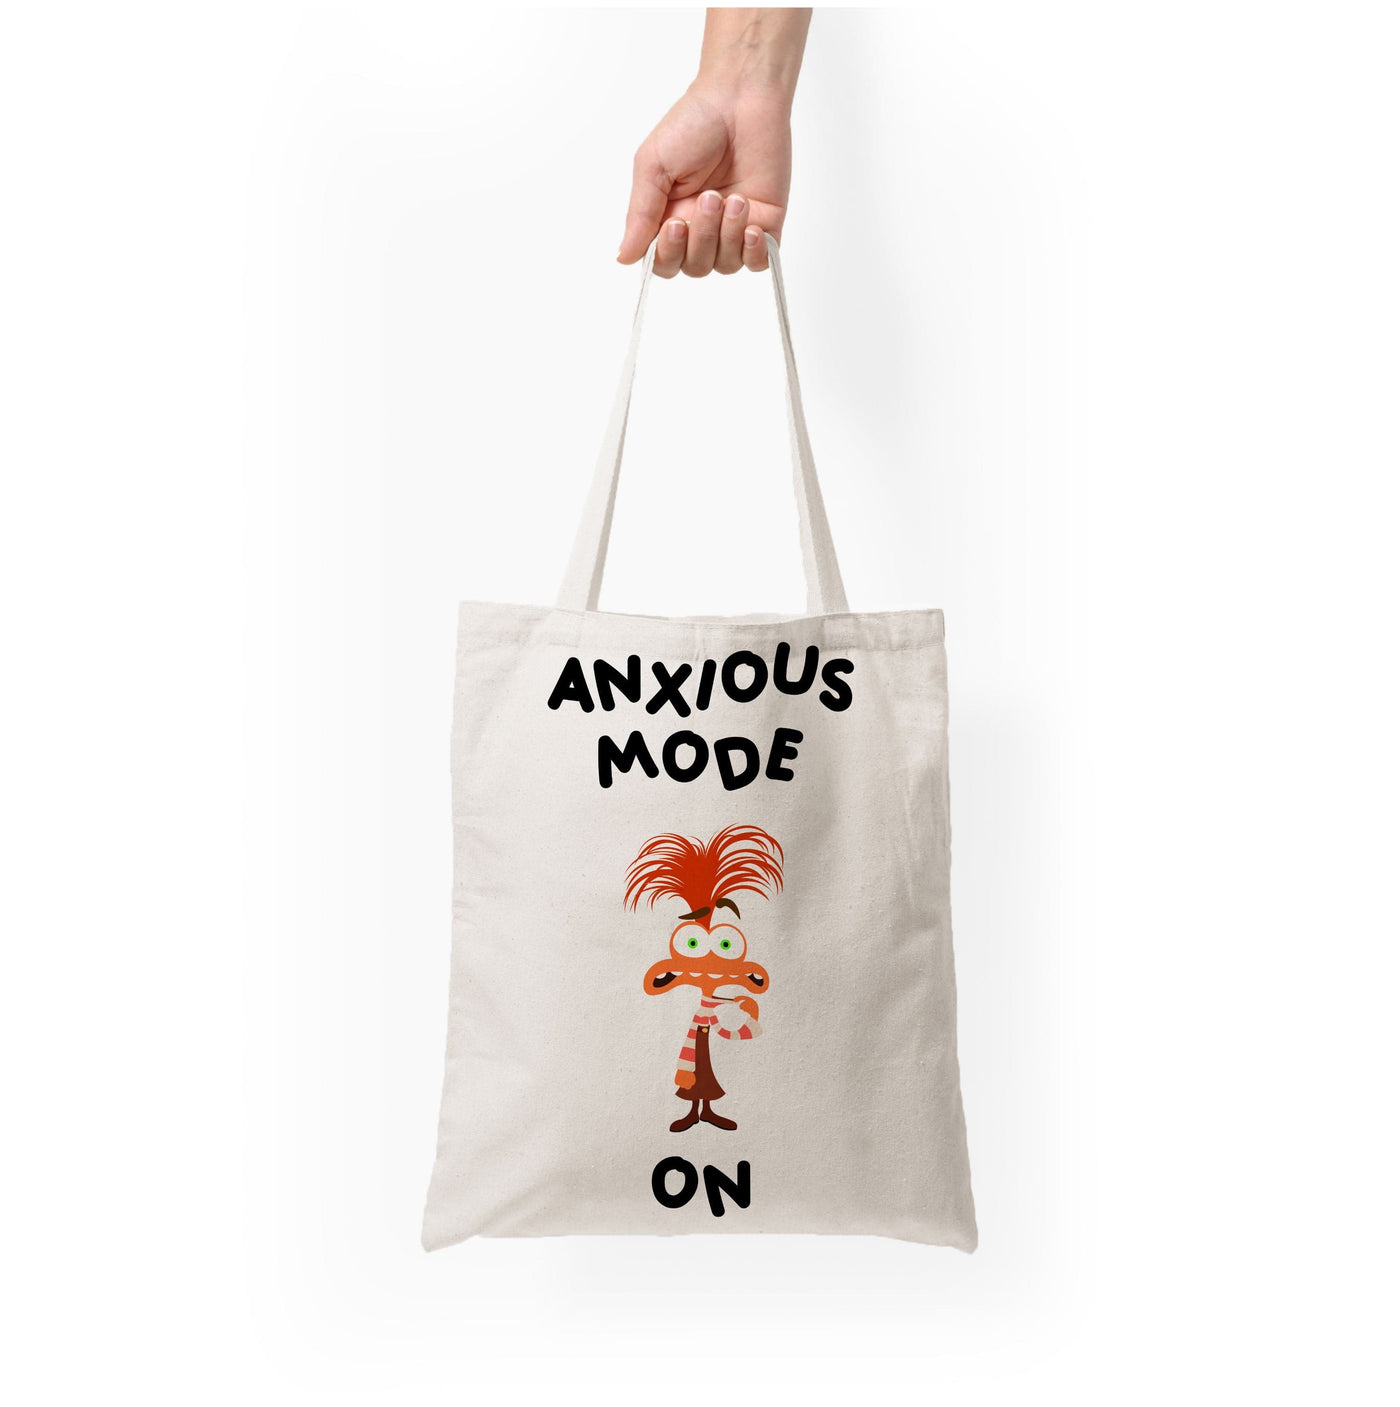 Anxious Mode On - Inside Out Tote Bag